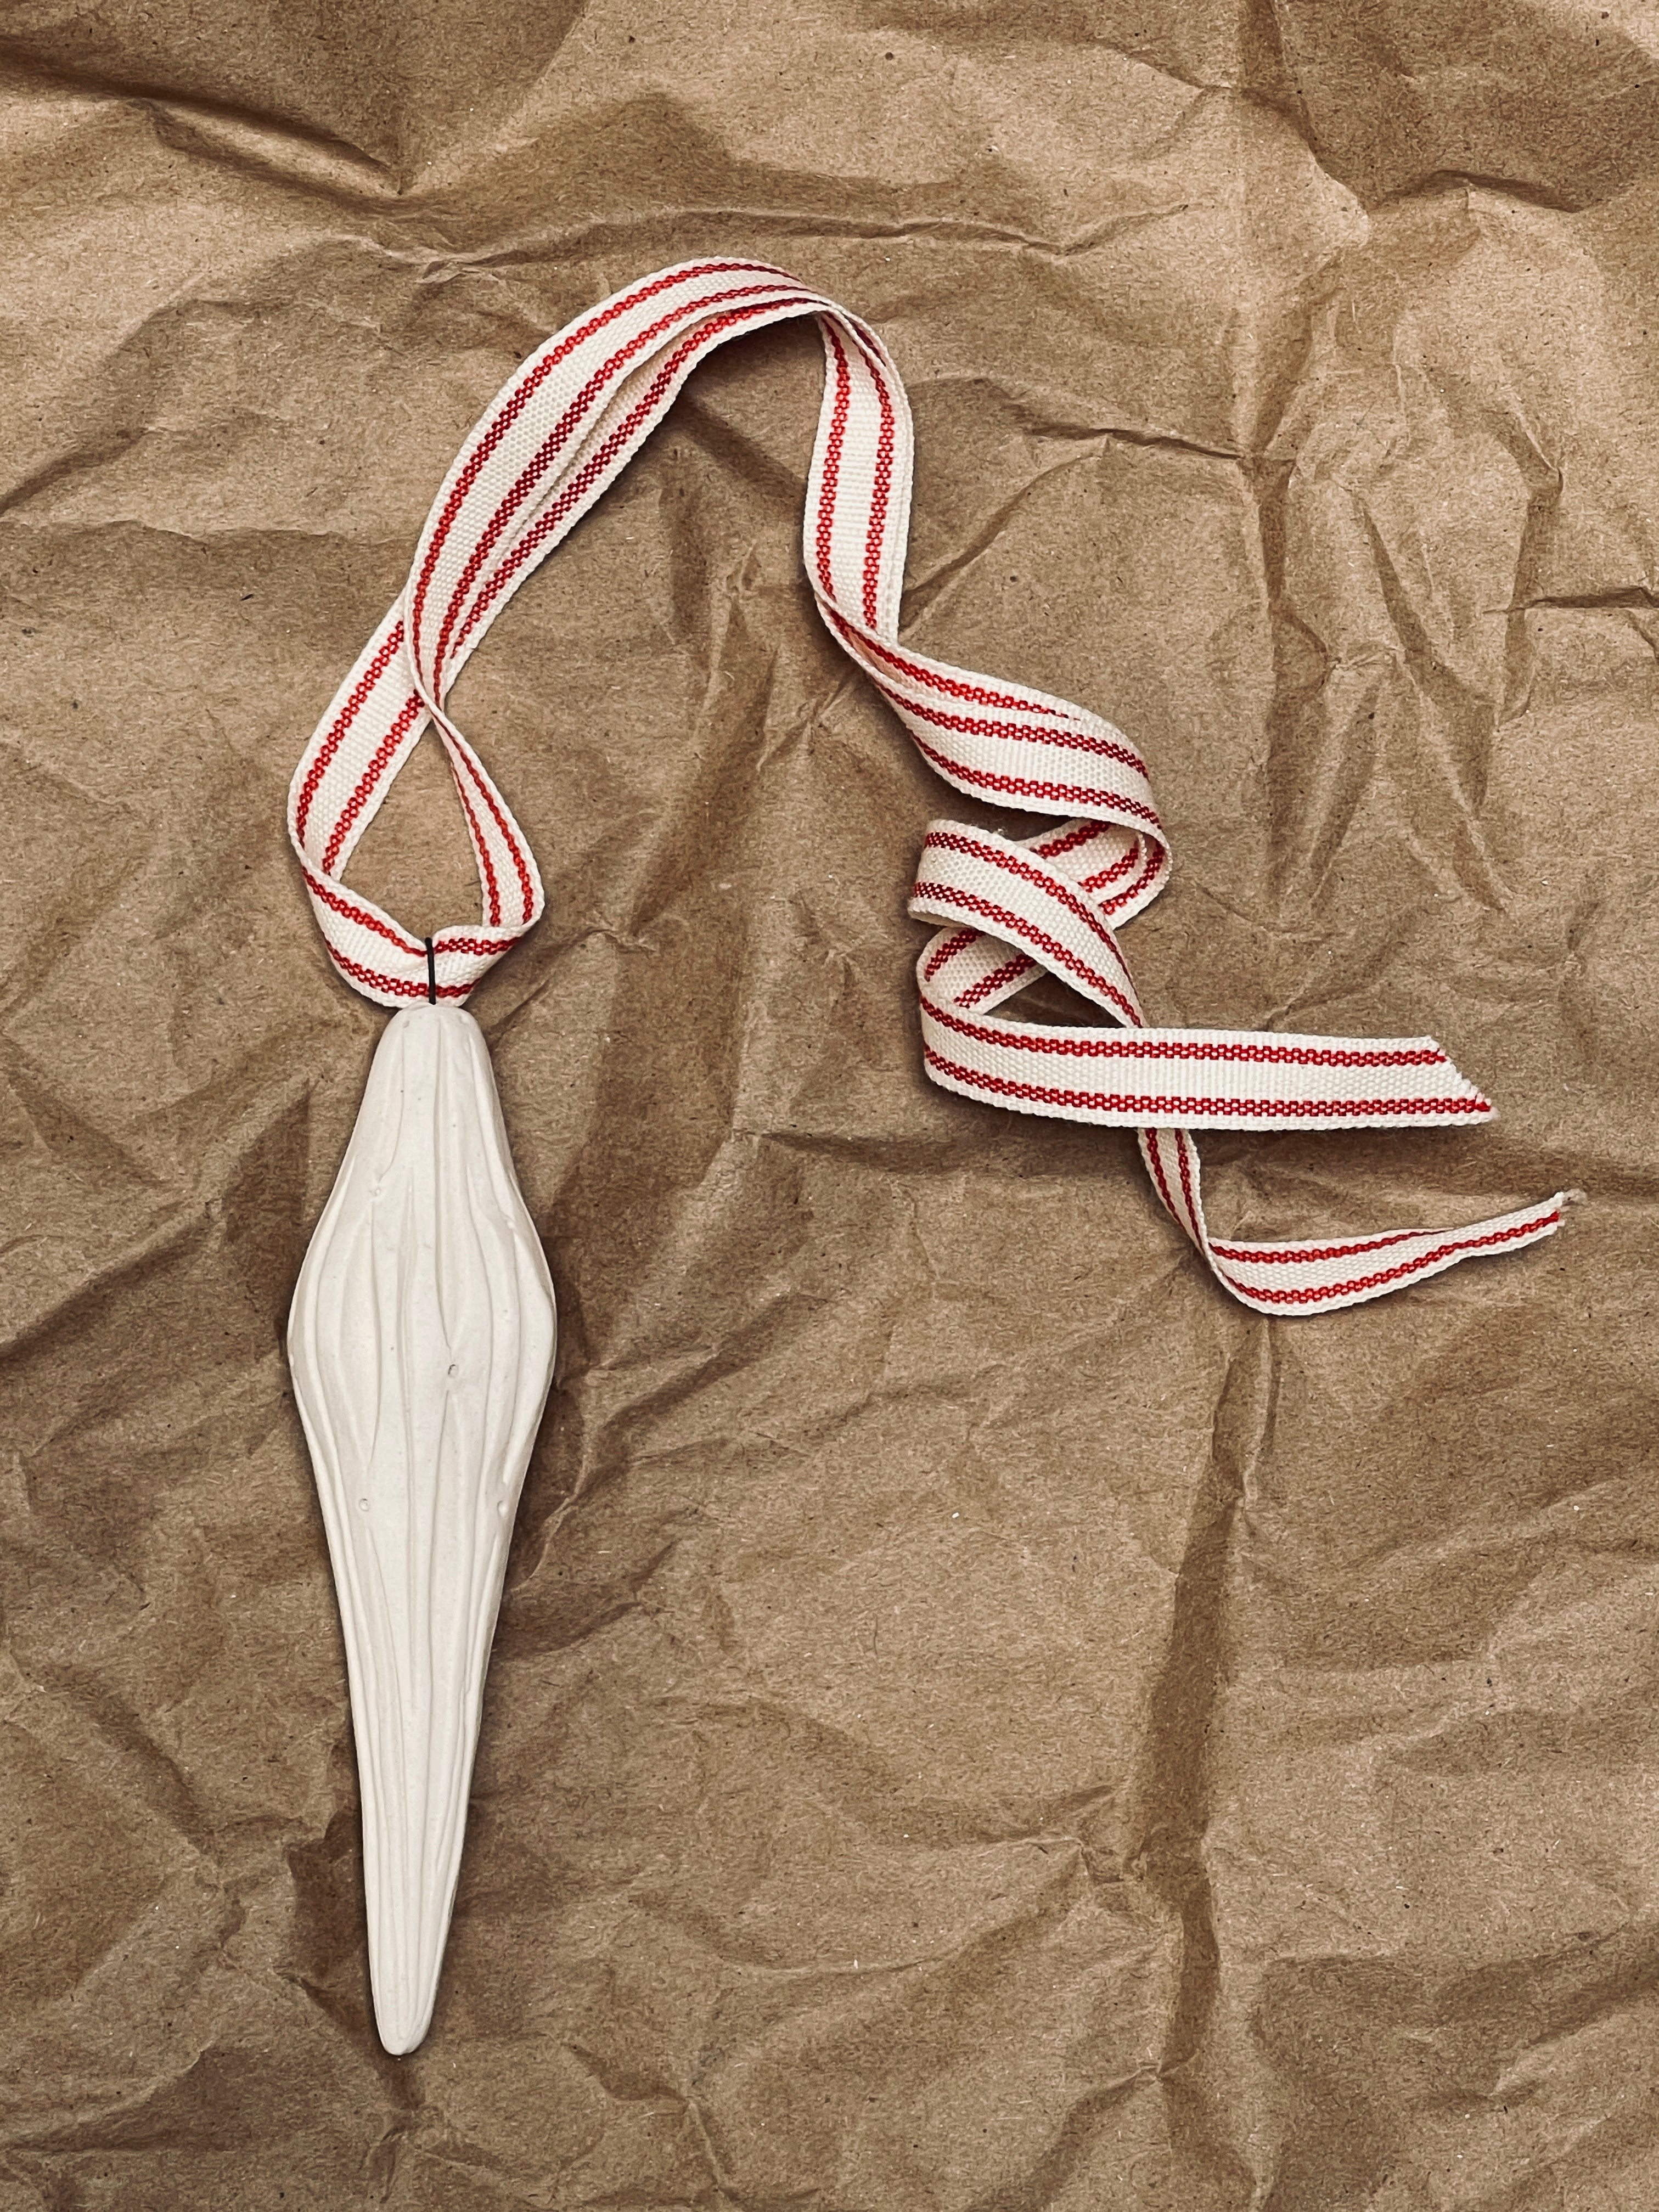 KATE PAK HAND CARVED ICICLE ORNAMENT